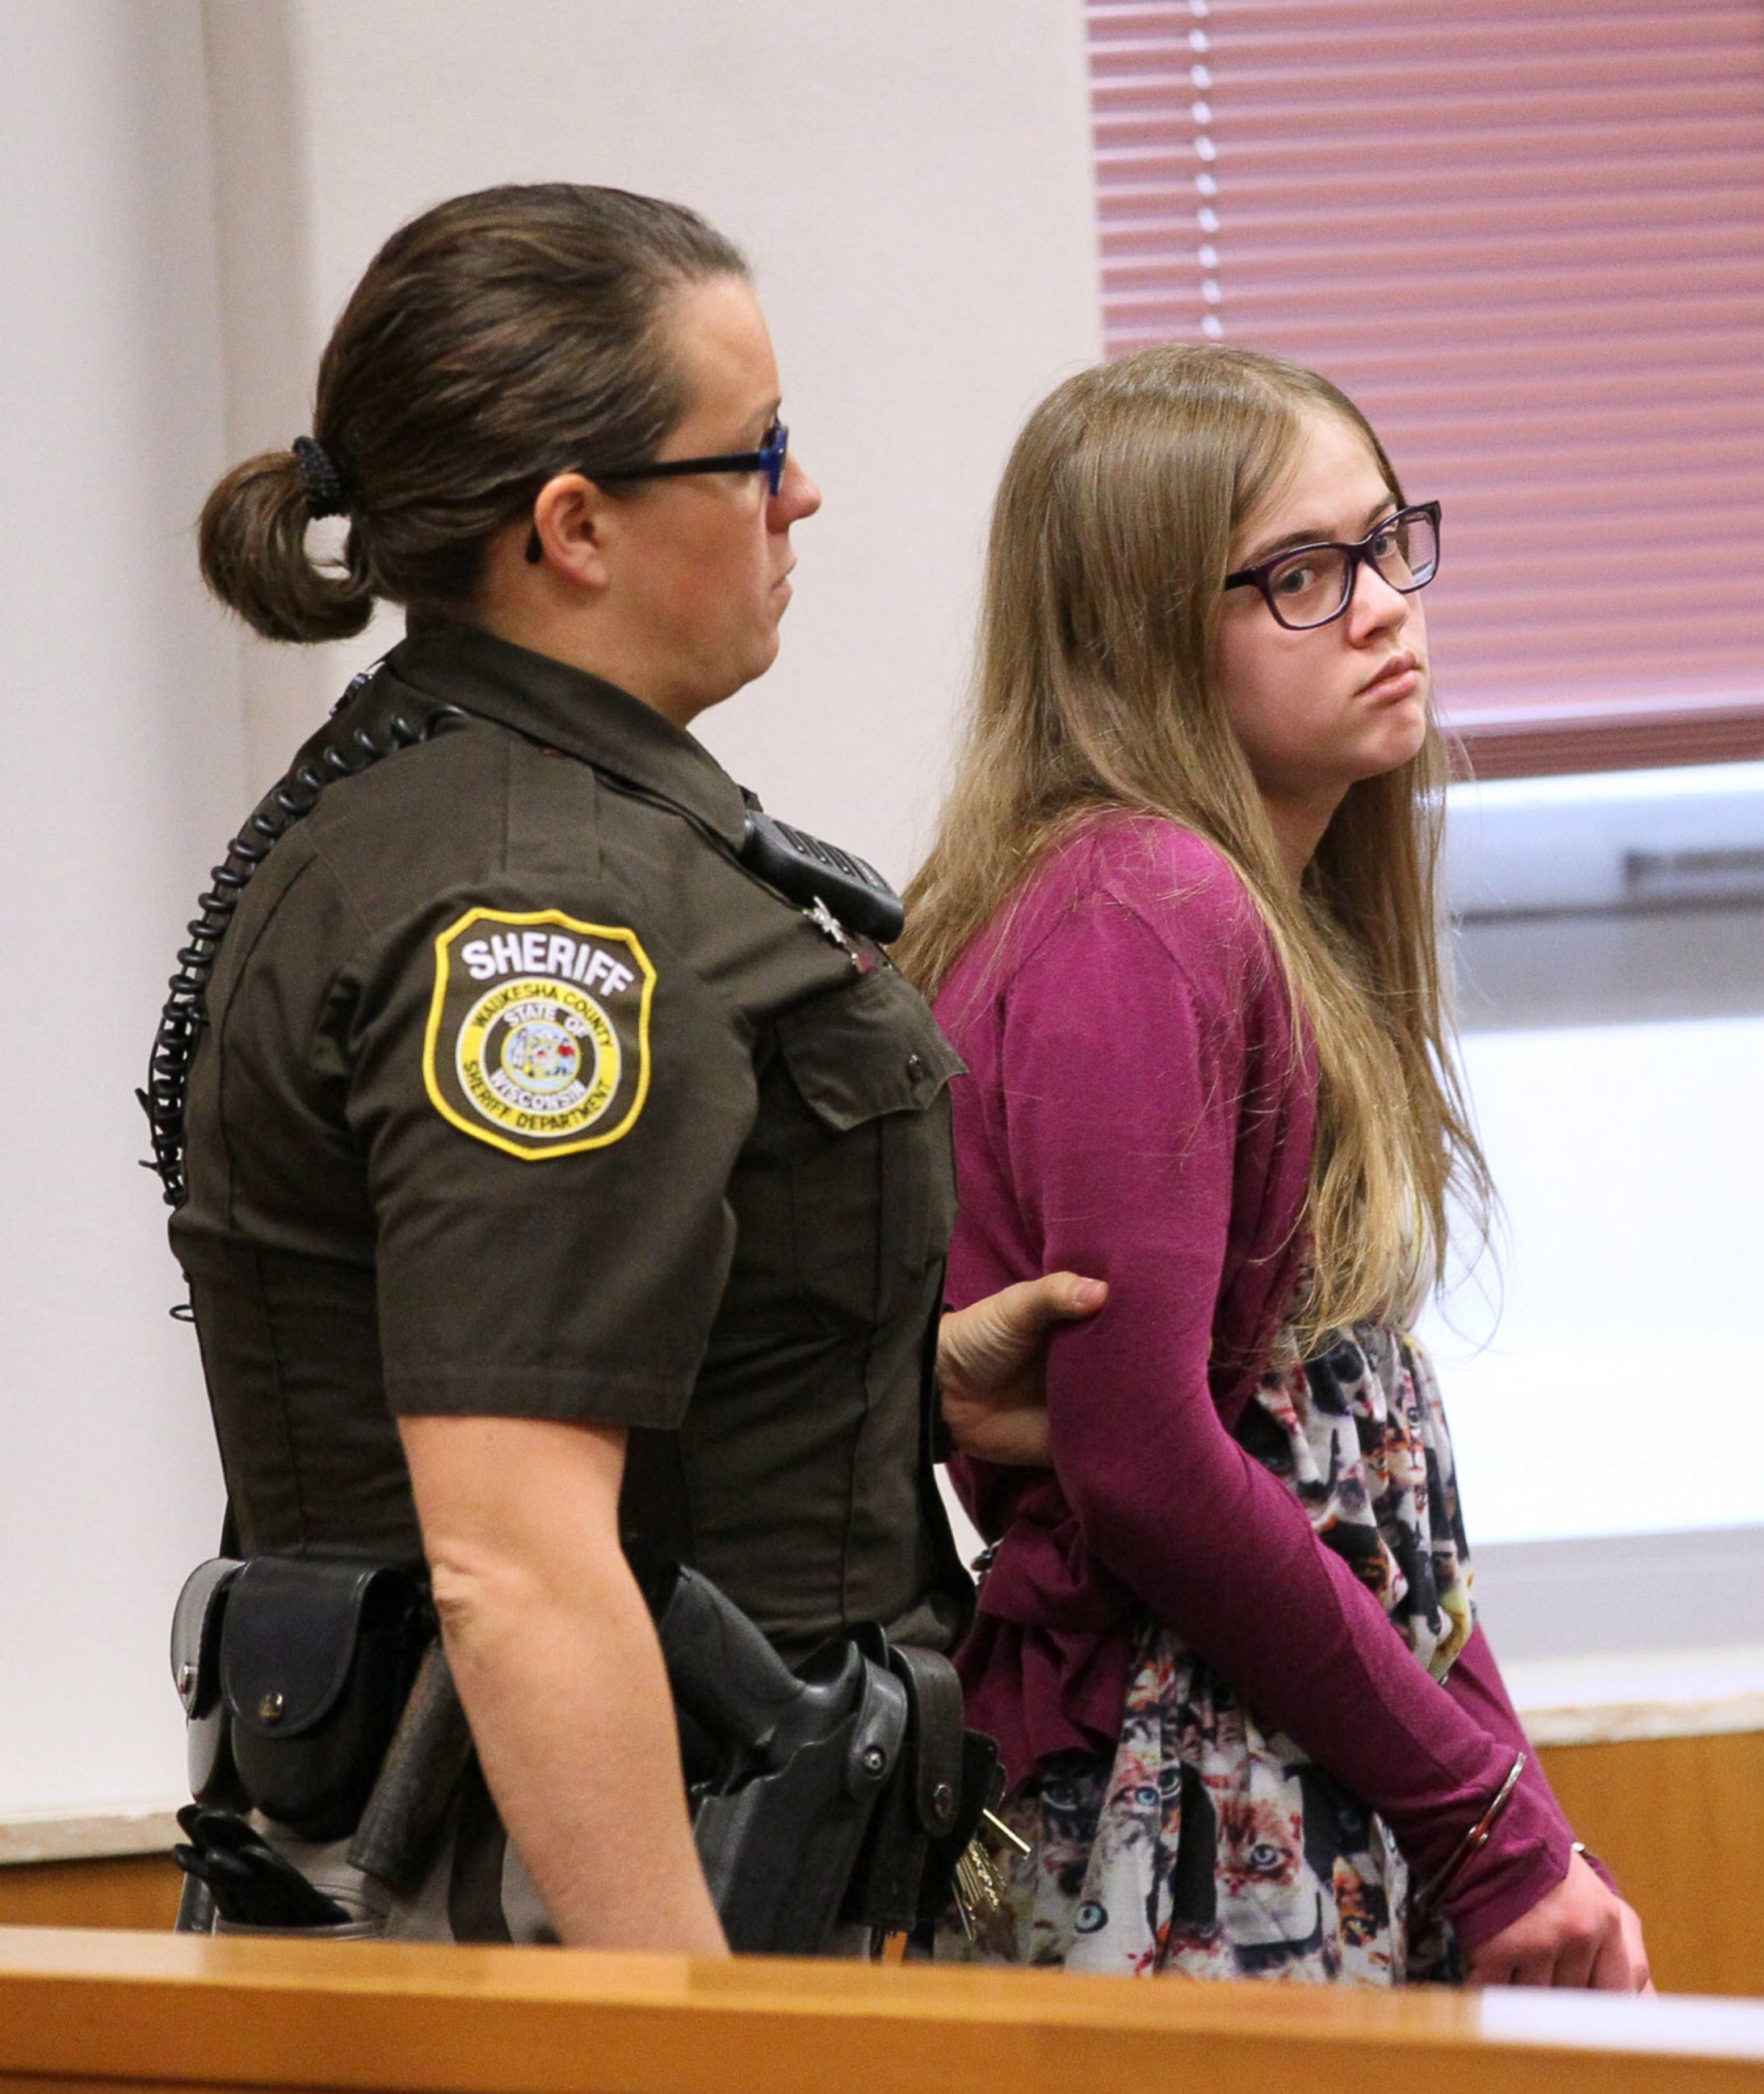 PHOTO: Morgan Geyser is brought into court by a sheriff's deputy on Aug. 21, 2015 during the arraignment of the Slenderman stabbing trial in Waukesha County Court in Waukesha, Wisconsin. 